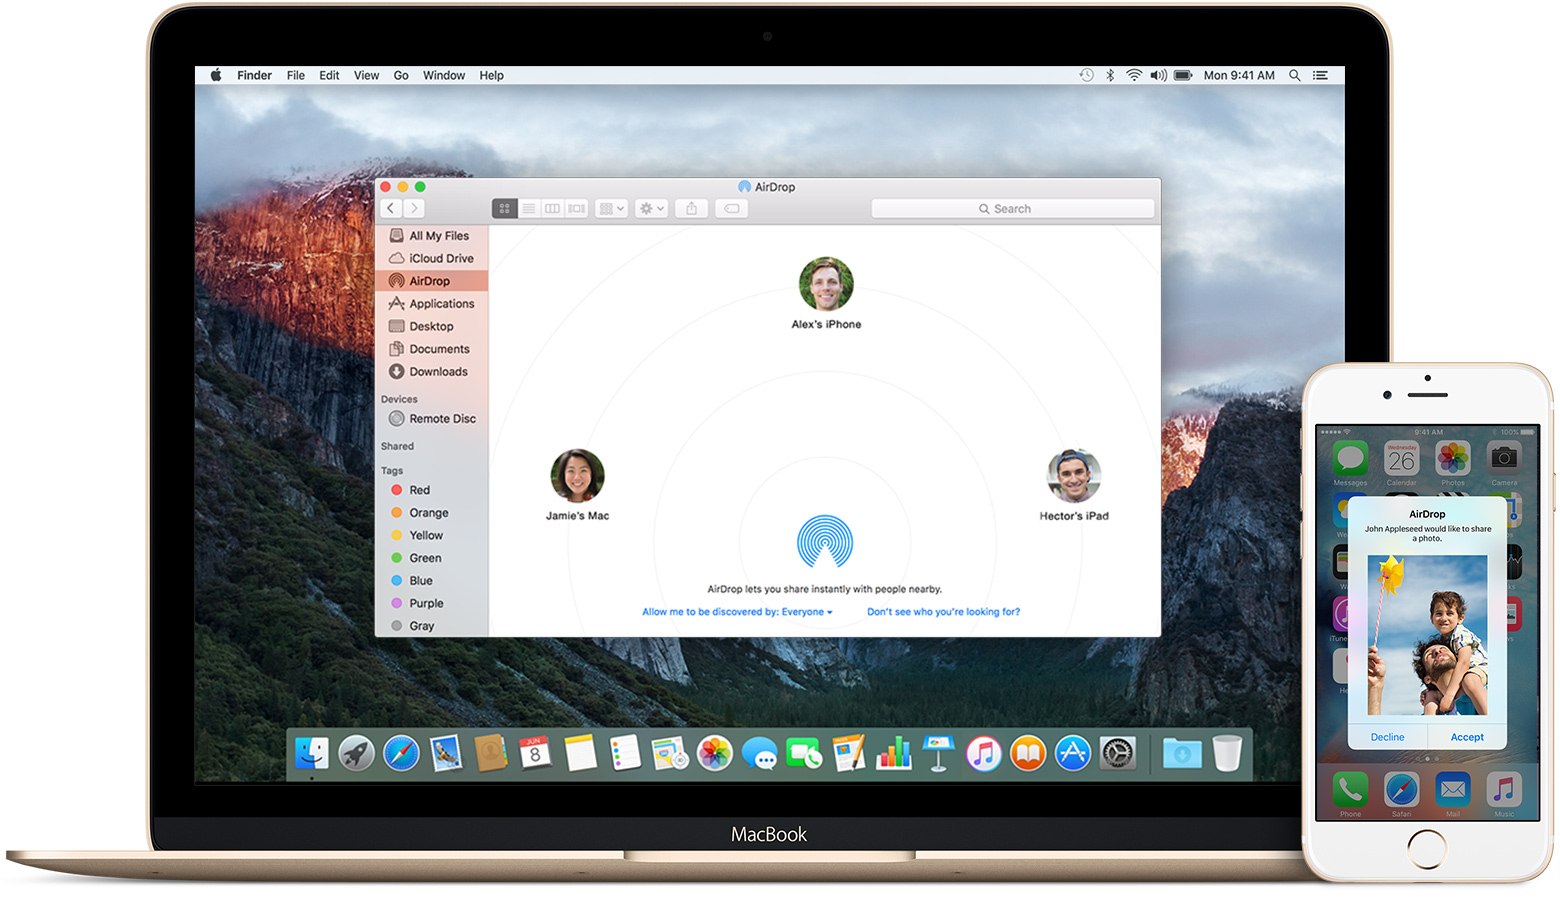 Use AirDrop to send content from your Mac - Apple Support